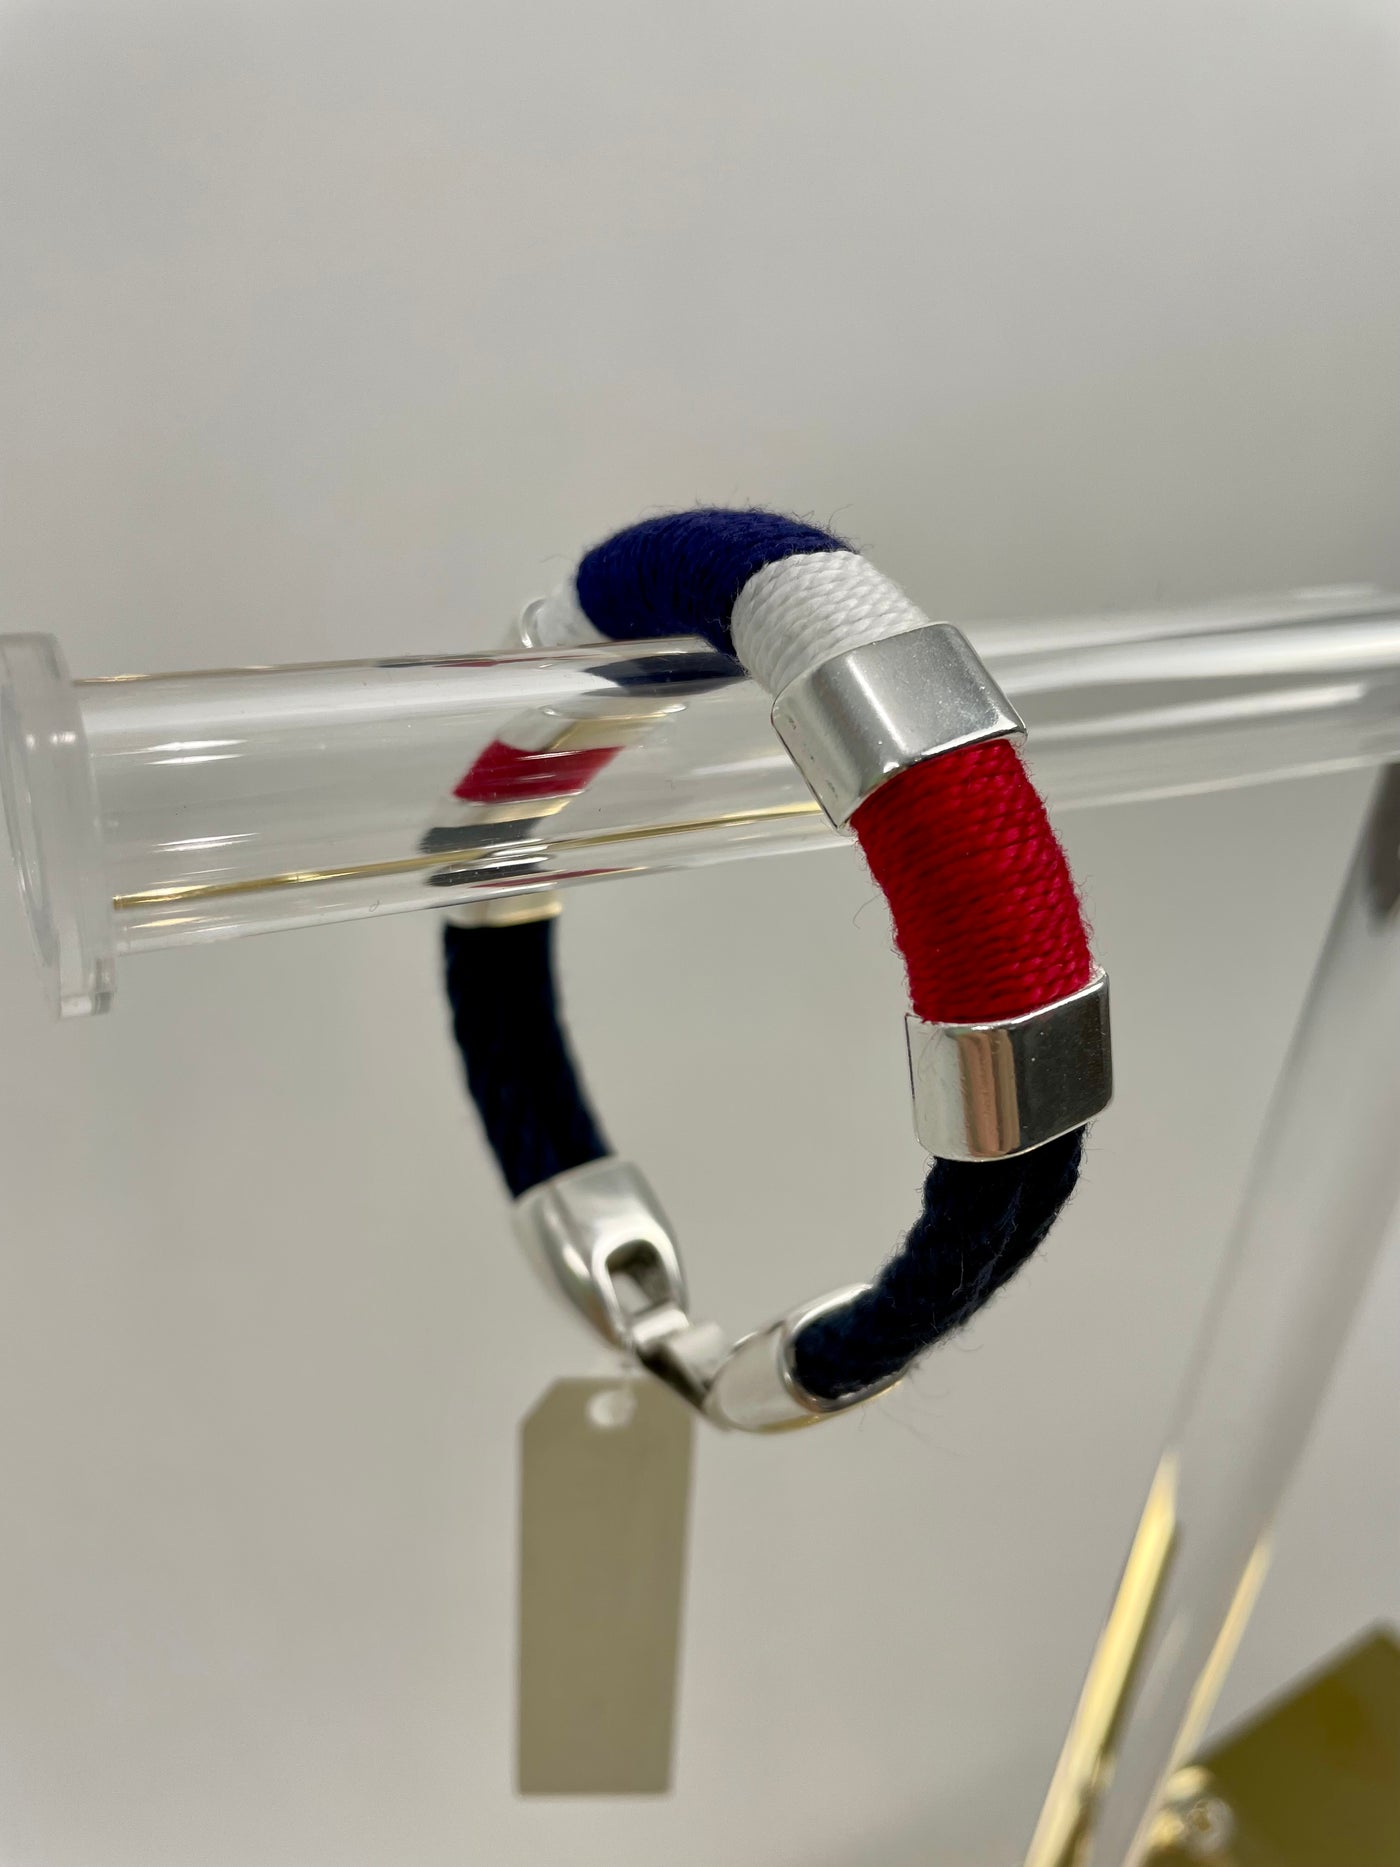 Navy blue, red, and white make up the pattern of this handmade rope bracelet with silver metallic accents and clasp to create a classic New England coastal bracelet.